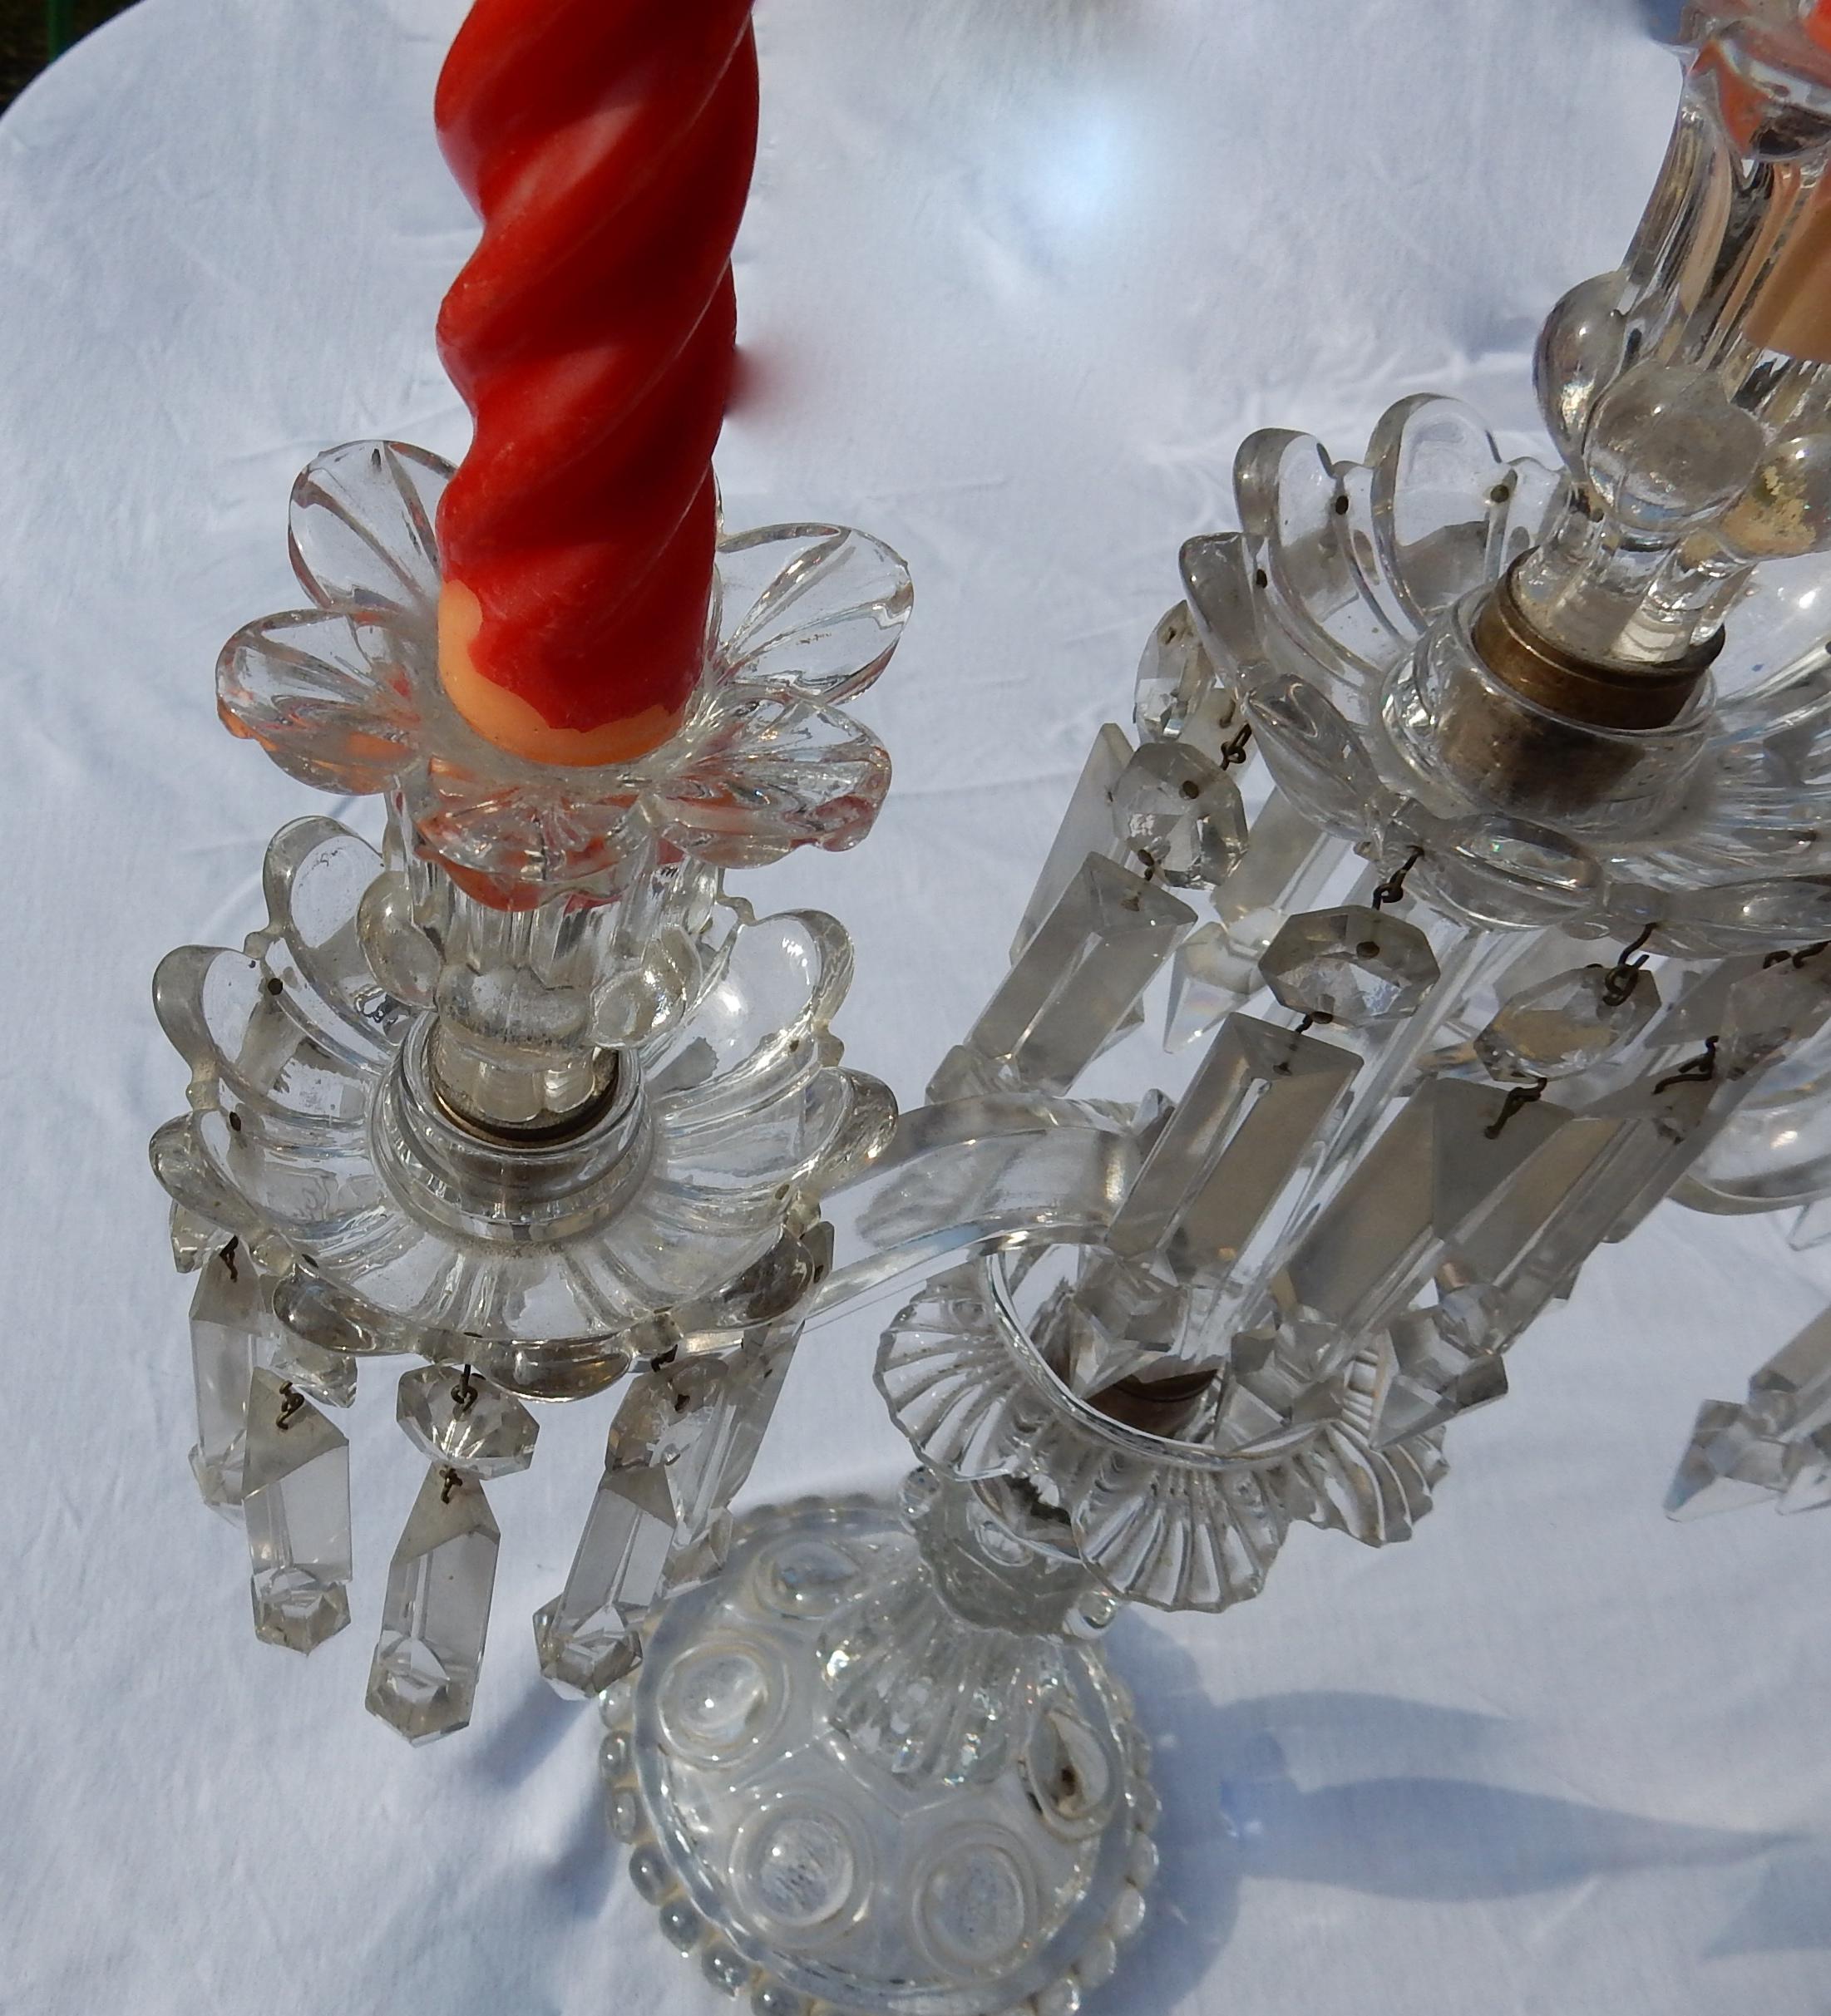 1950 Pair of Baccarat Crystal Chandeliers with 2 Arms and Signed Baccarat 1